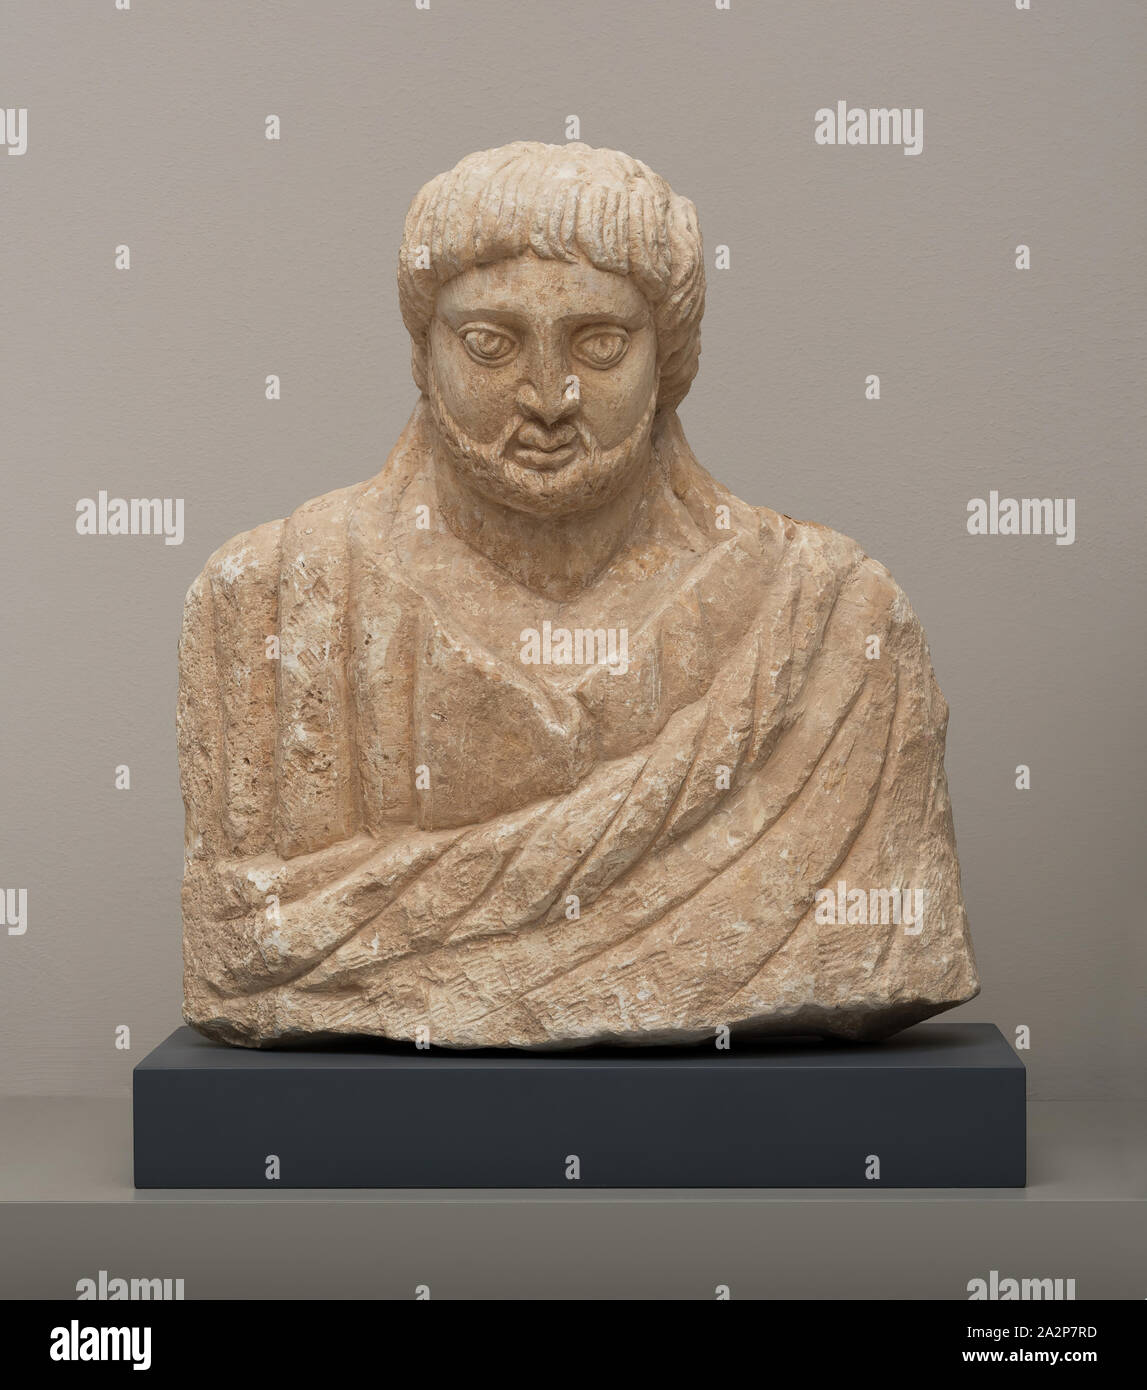 Roman, Bust of Bearded Man, 1st or 2nd century CE, Limestone, Including base: 21 1/8 × 18 × 9 3/4 inches (53.7 × 45.7 × 24.8 cm Stock Photo